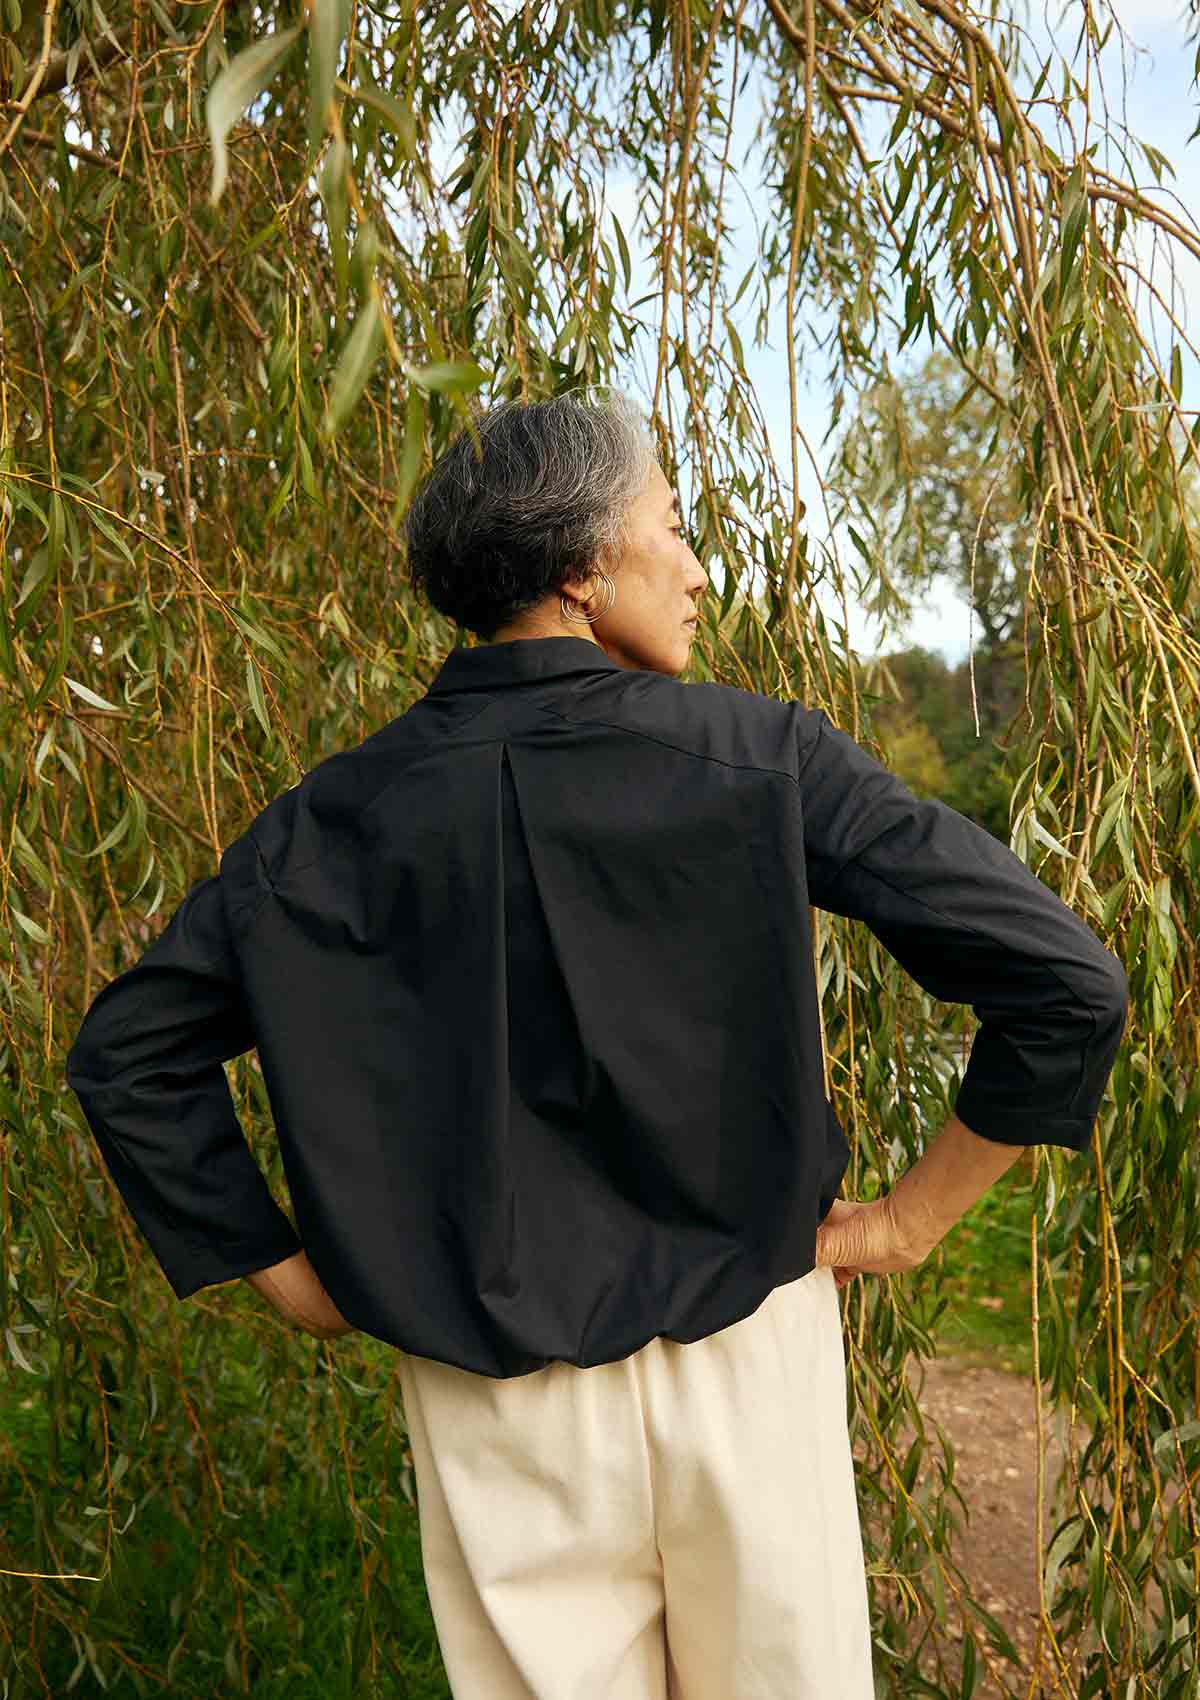 Women, standing back on, wearing the Asmuss Roam Jacket showing the inverted pleat detail on the back, with her hands on her hips. She is standing in front of willows in a park